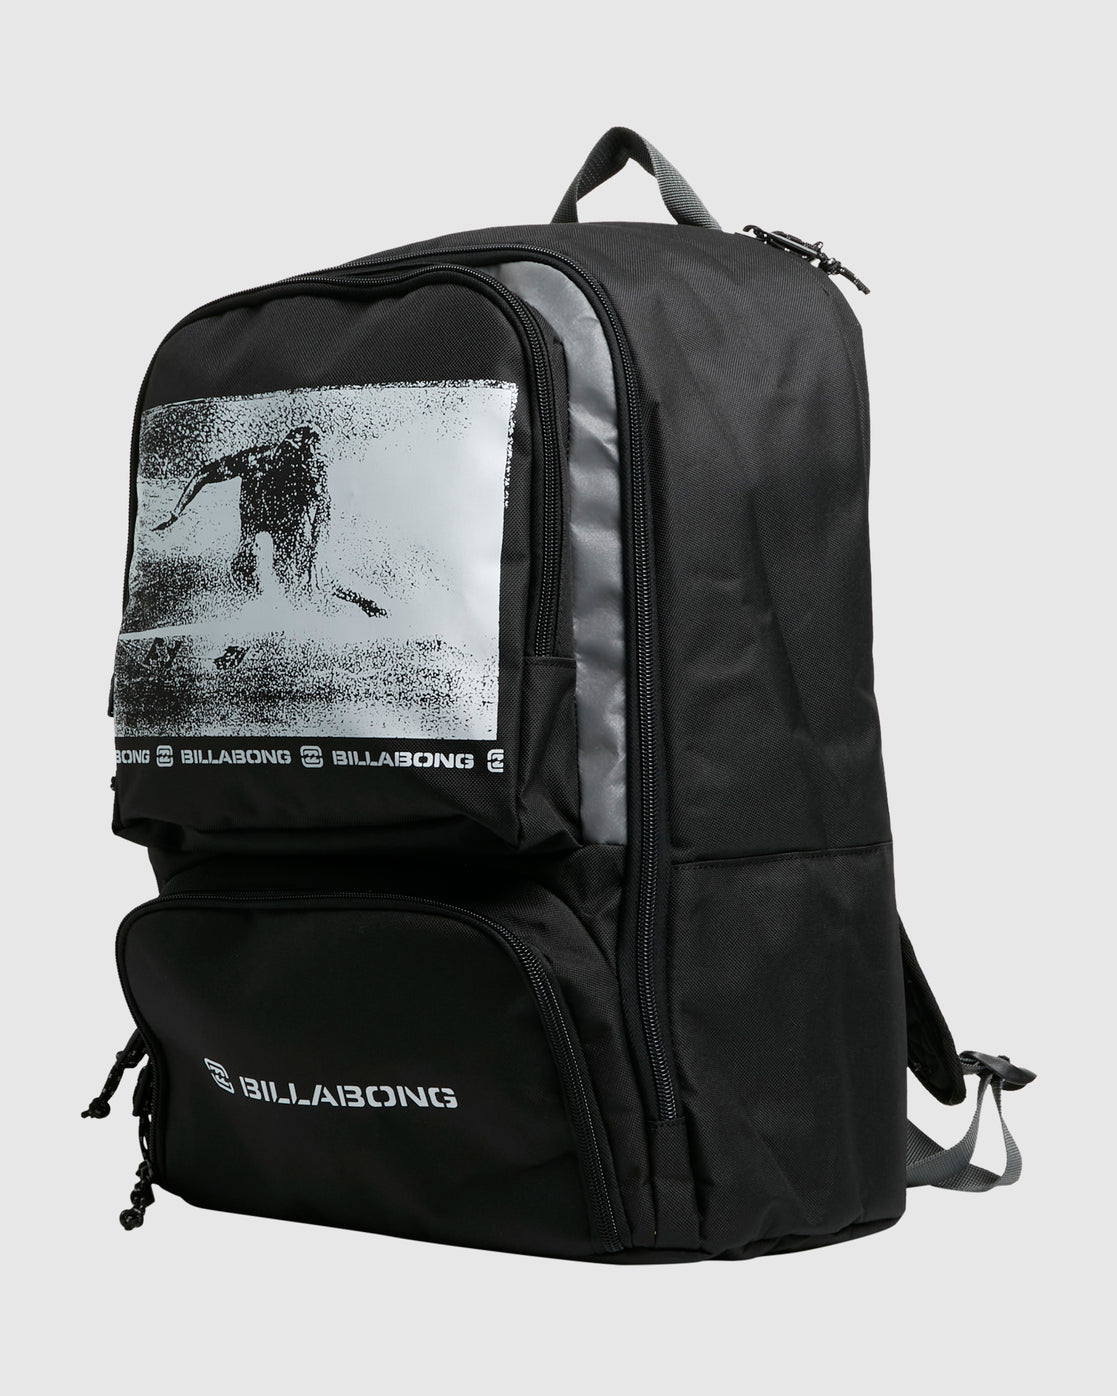 Billabong Juggernaught 30 Litre Backpack in black with white print from side